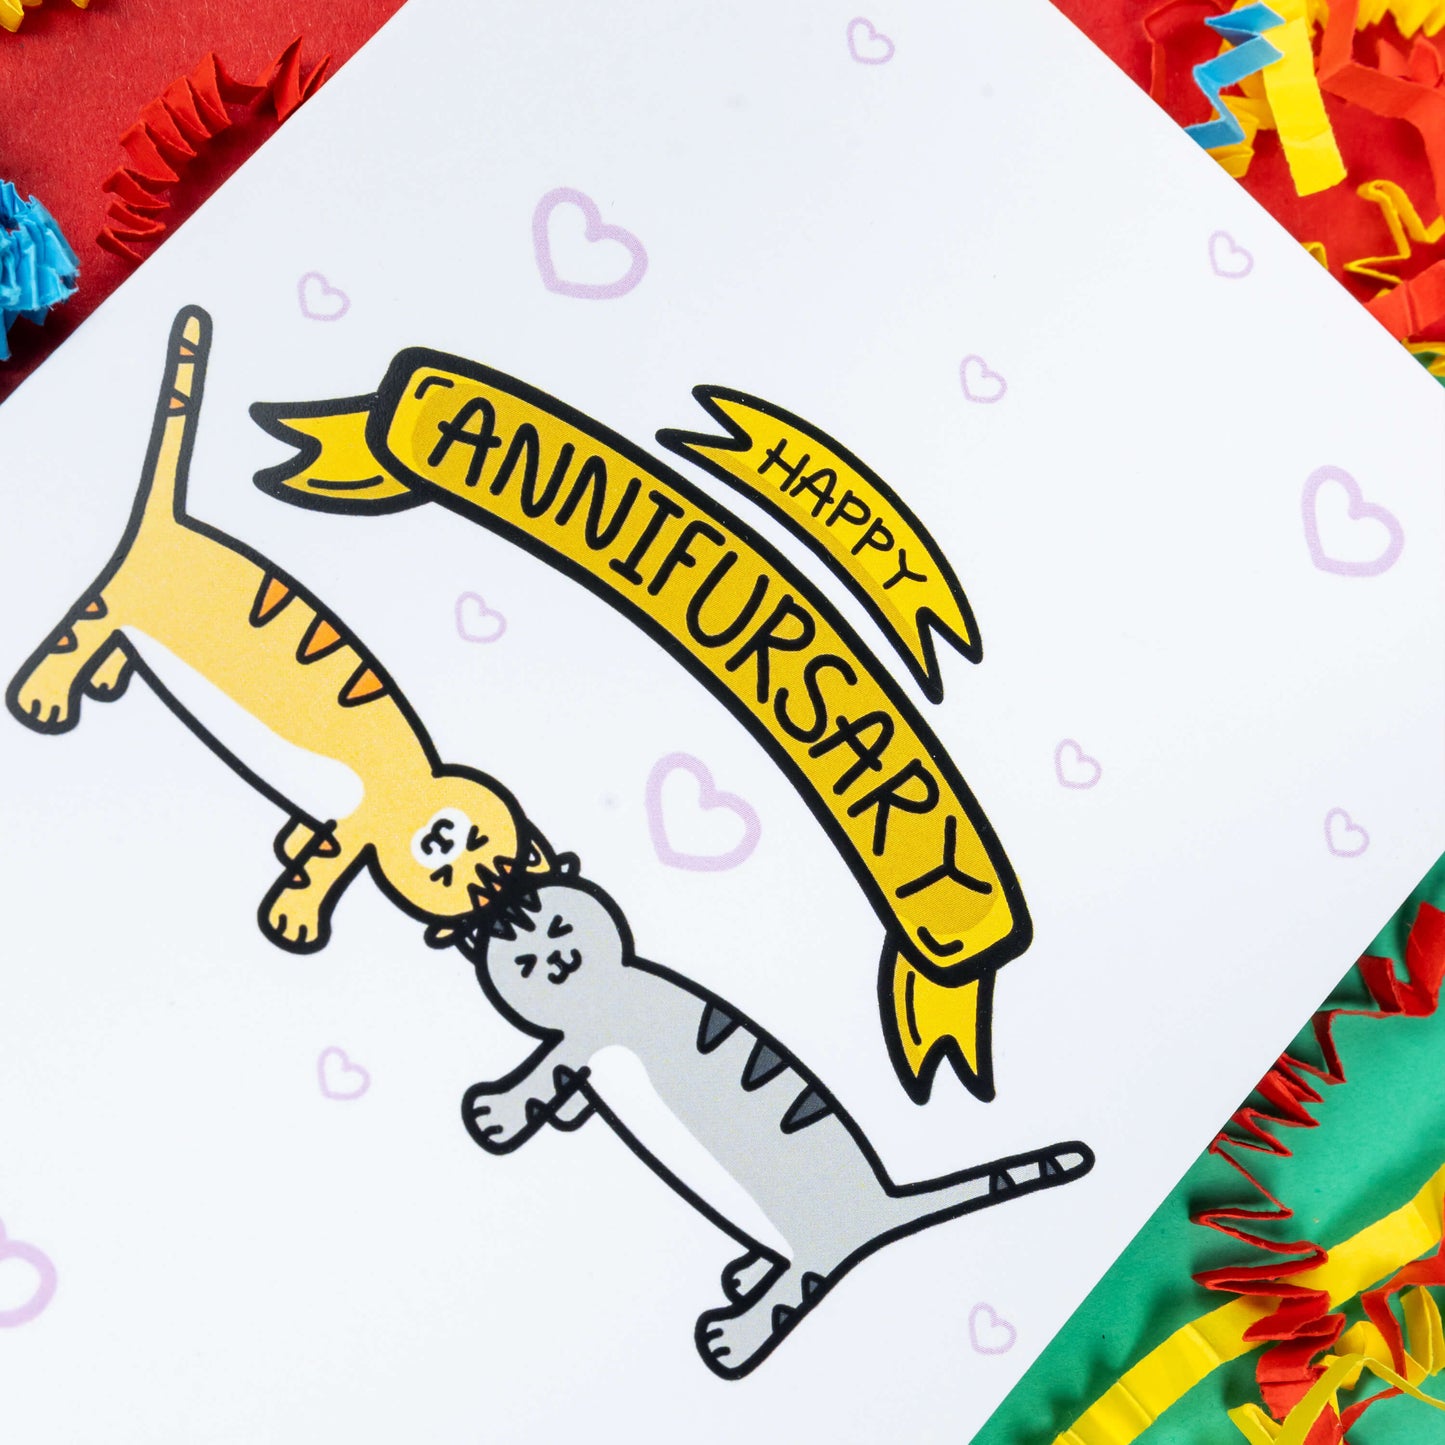 a white greeting card with light pink hearts dotted all over. 'Happy ANNIFURSARY' is written in a gold banner on the card with two cat illustrations underneath, one ginger and one grey. The cats are rubbing their heads together. The background of the photo is red, blue and green card with paper card decorations.